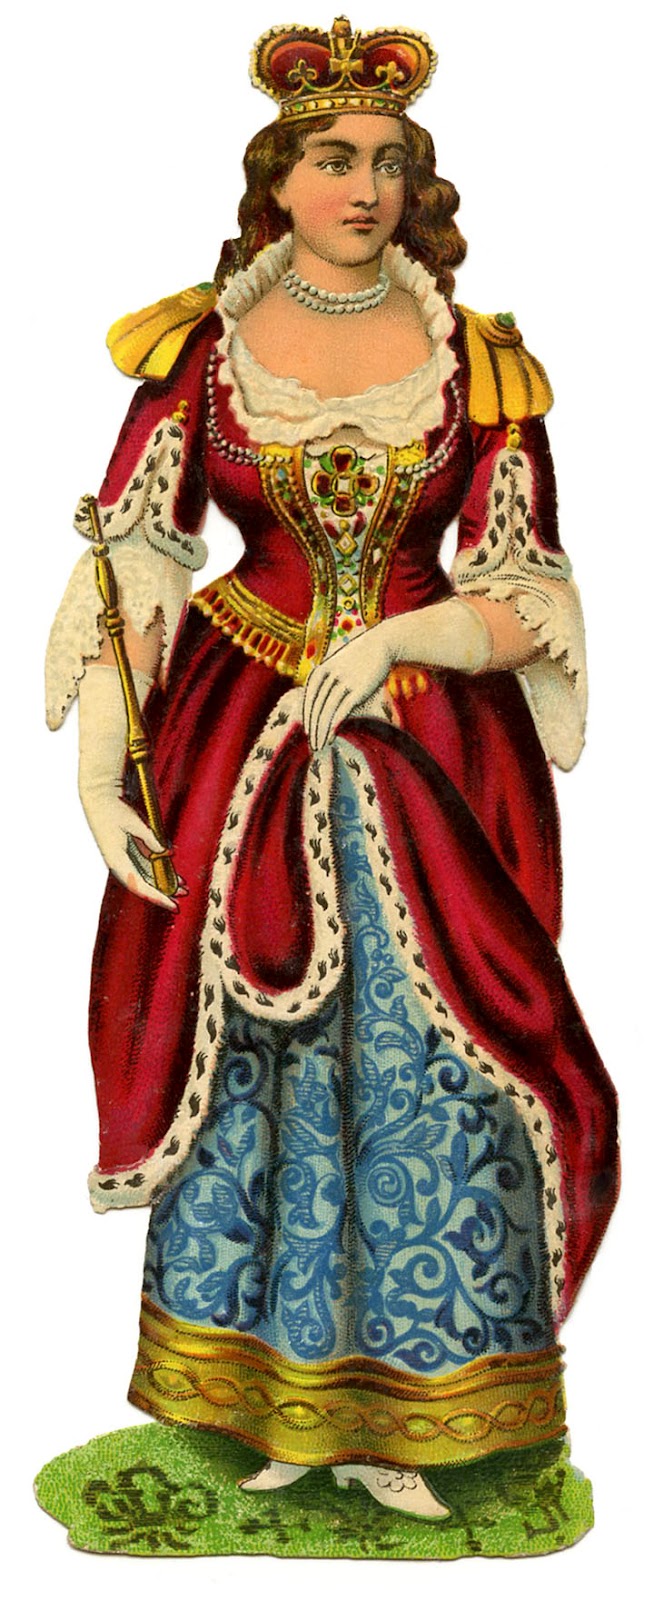 Vintage Graphic - Young Queen Victoria - Regal Outfit ...